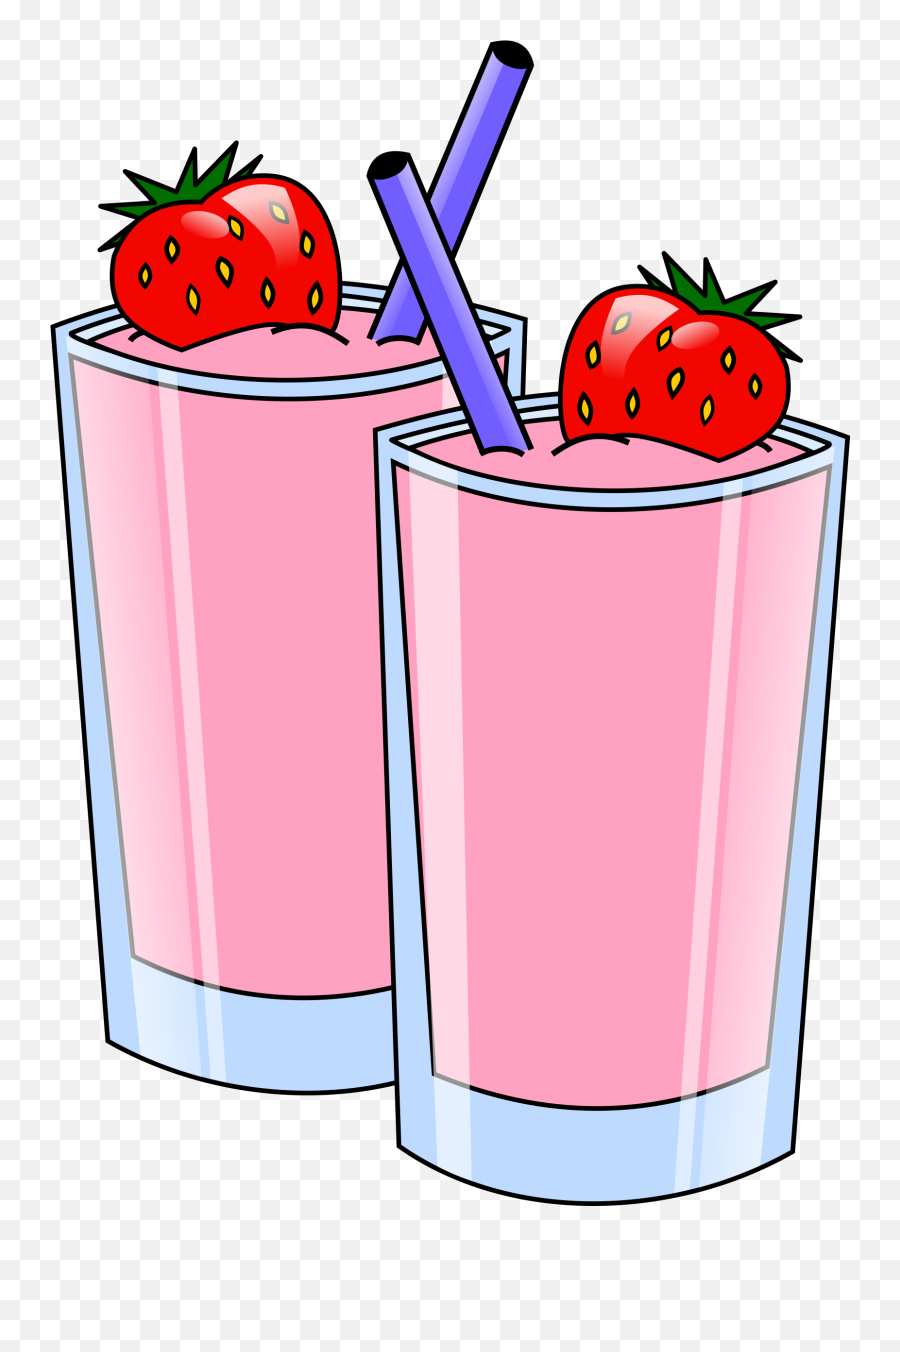 Filesrd - Strawberrysmoothiepng Wikimedia Commons Transparent Background Smoothie Clipart,Strawberries Transparent Background